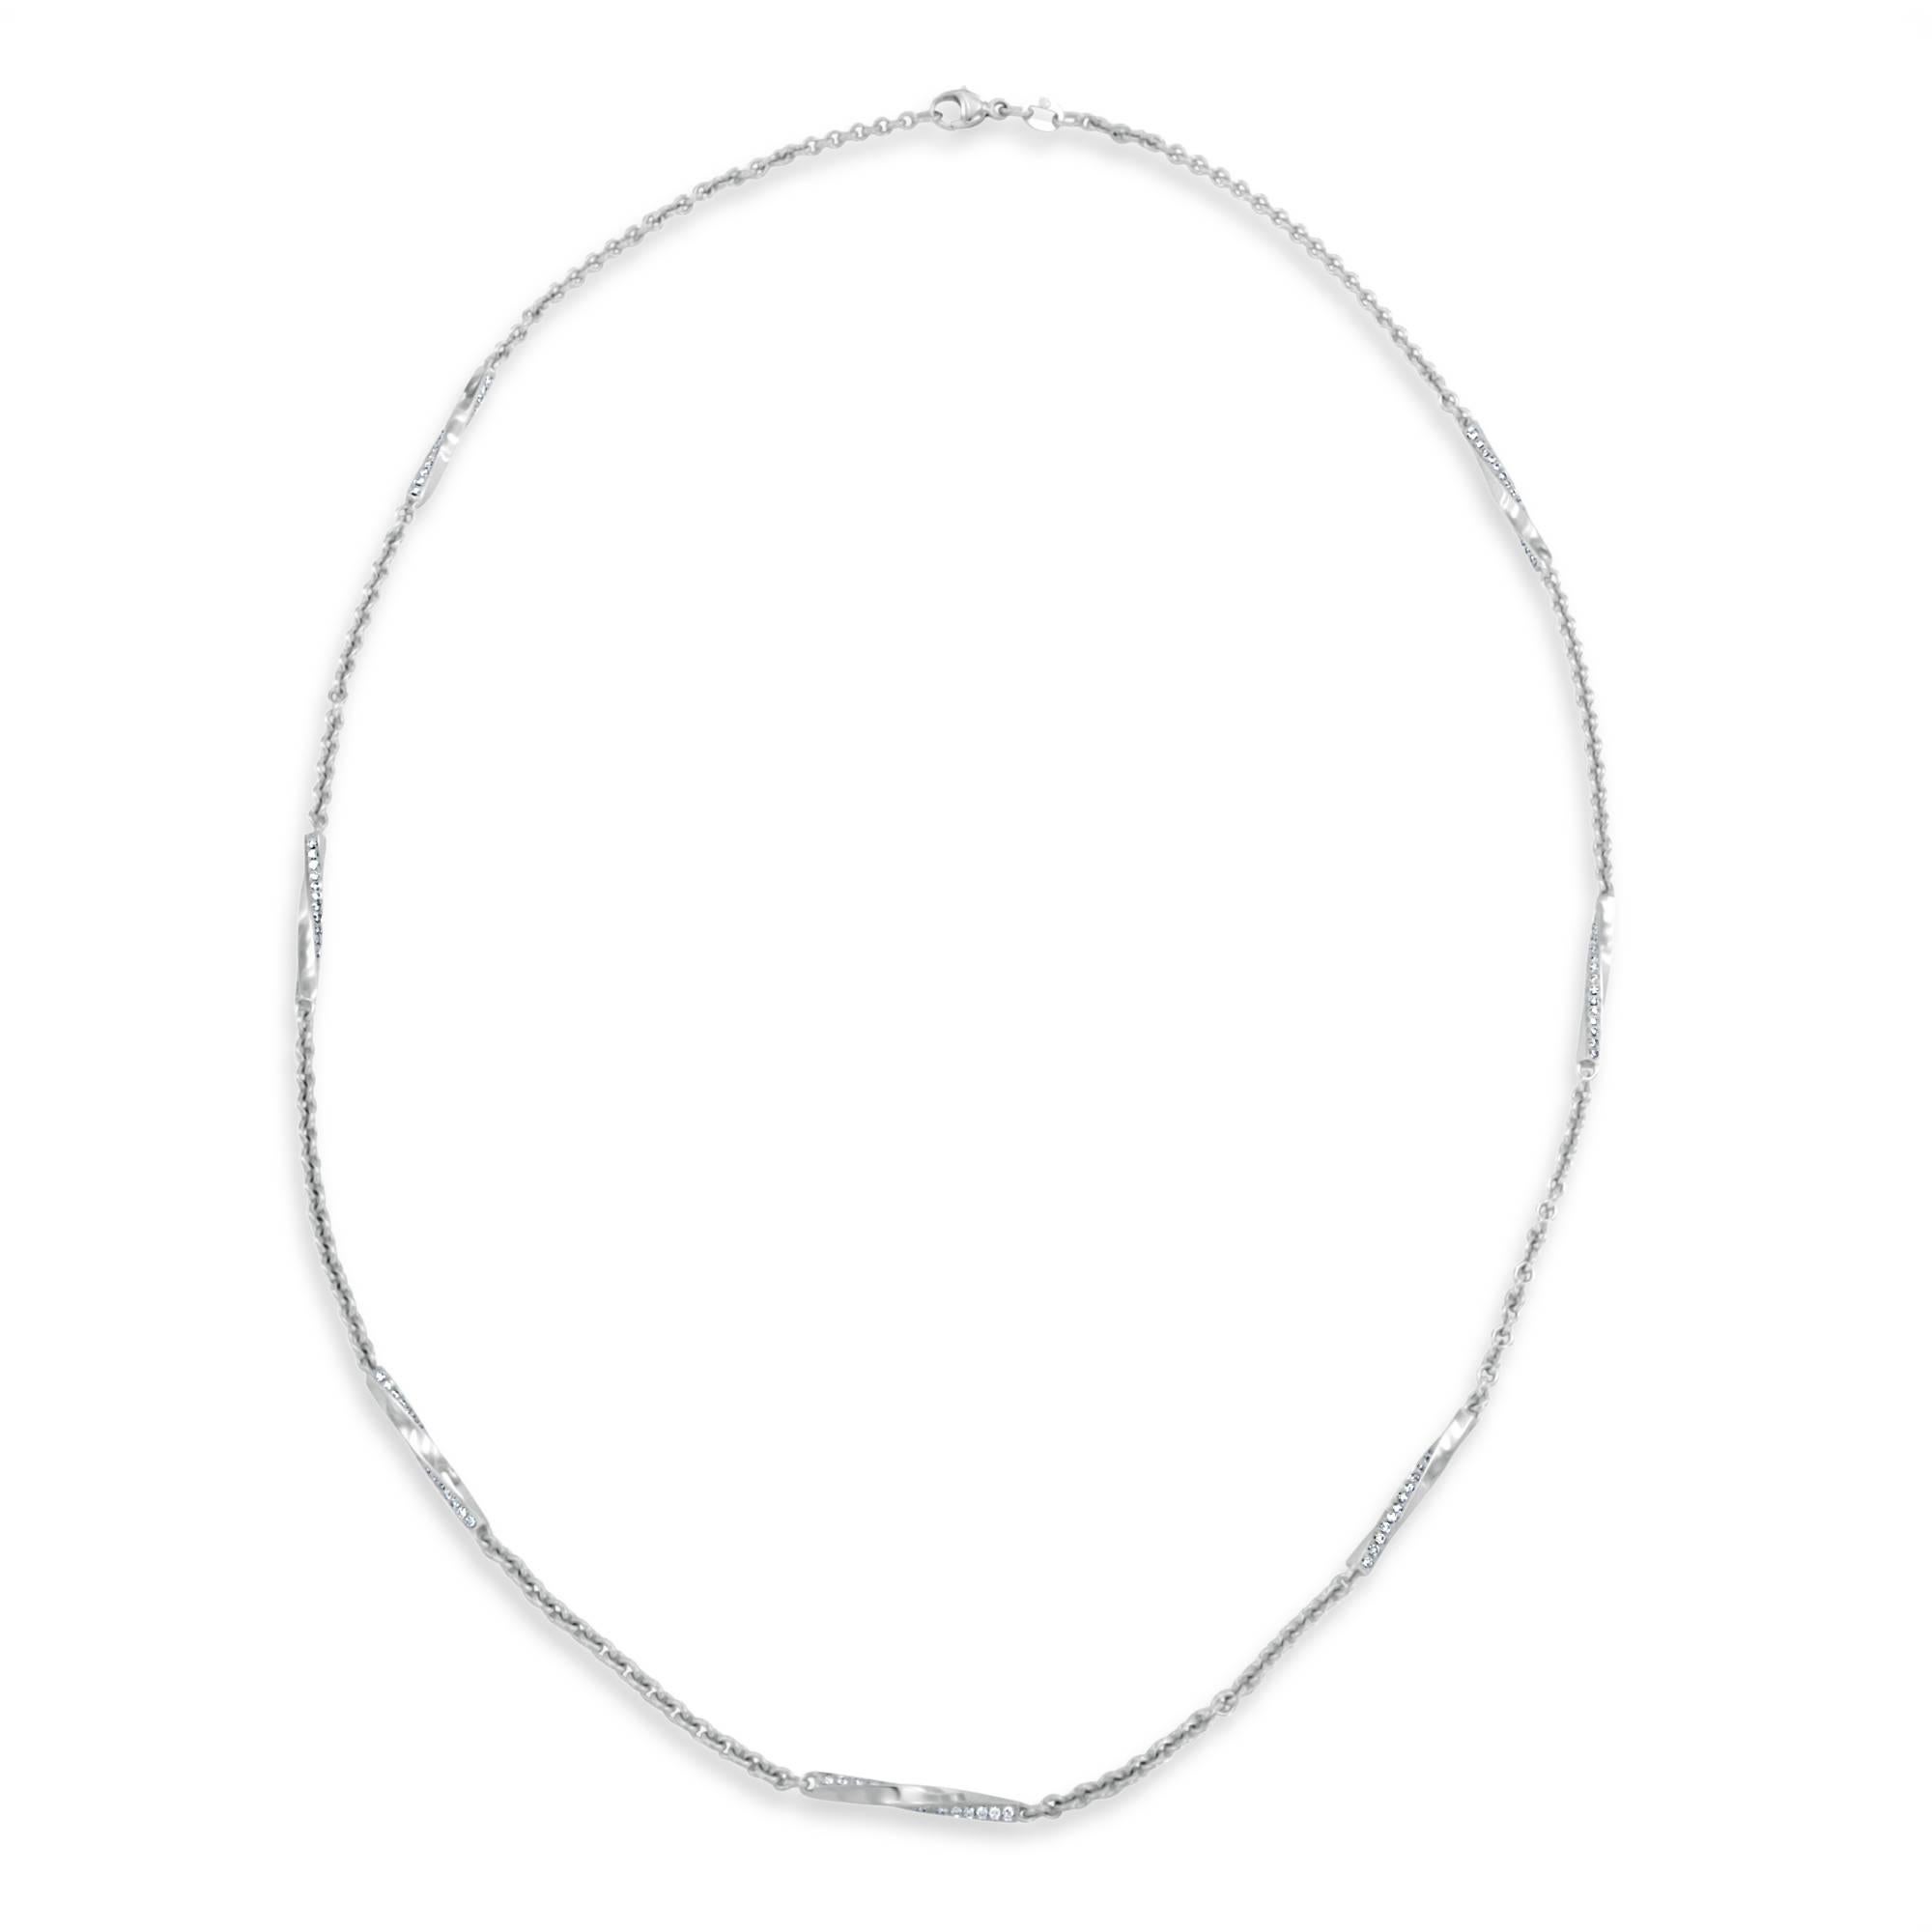 This posh 18 karat white gold chain necklace features seven spiral links containing 30-round brilliant cut diamonds each that are sublimely placed between one and a half inches of 2.30mm wide cable chain. The 210-diamonds weigh 1.05 carats total,